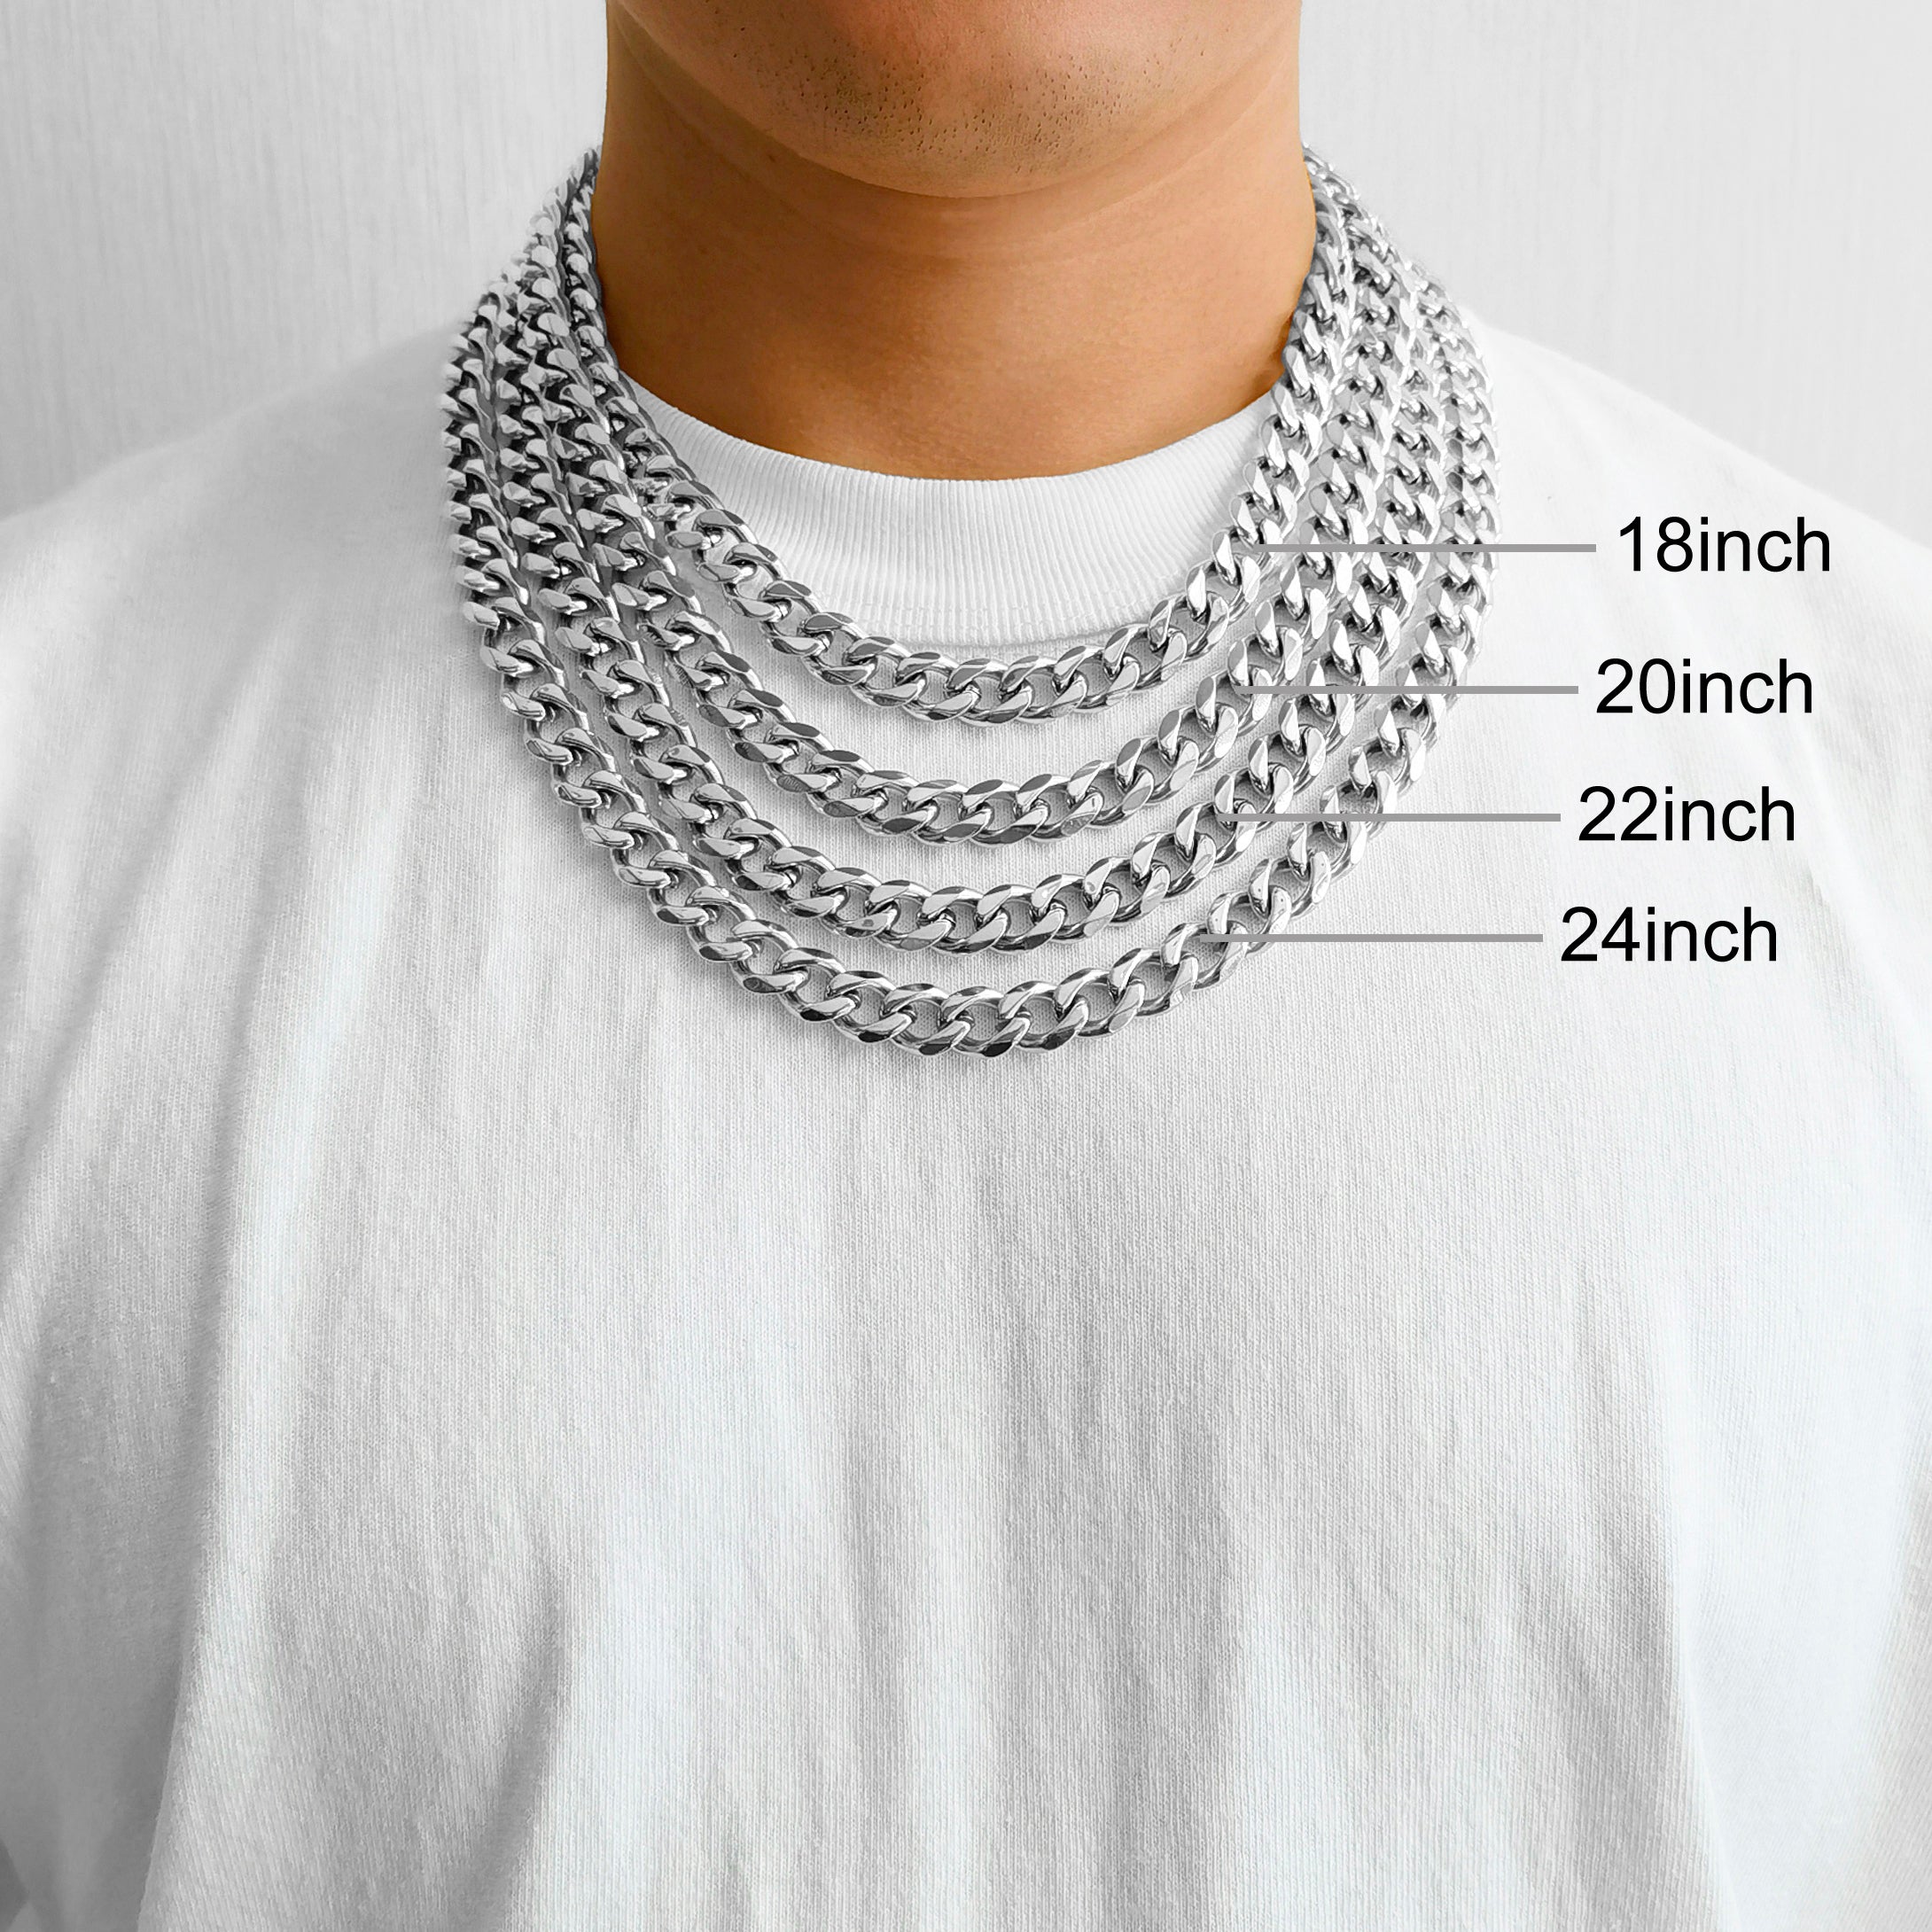 Men's 12mm Stainless Steel 18-24 Inch Curb Chain Necklace